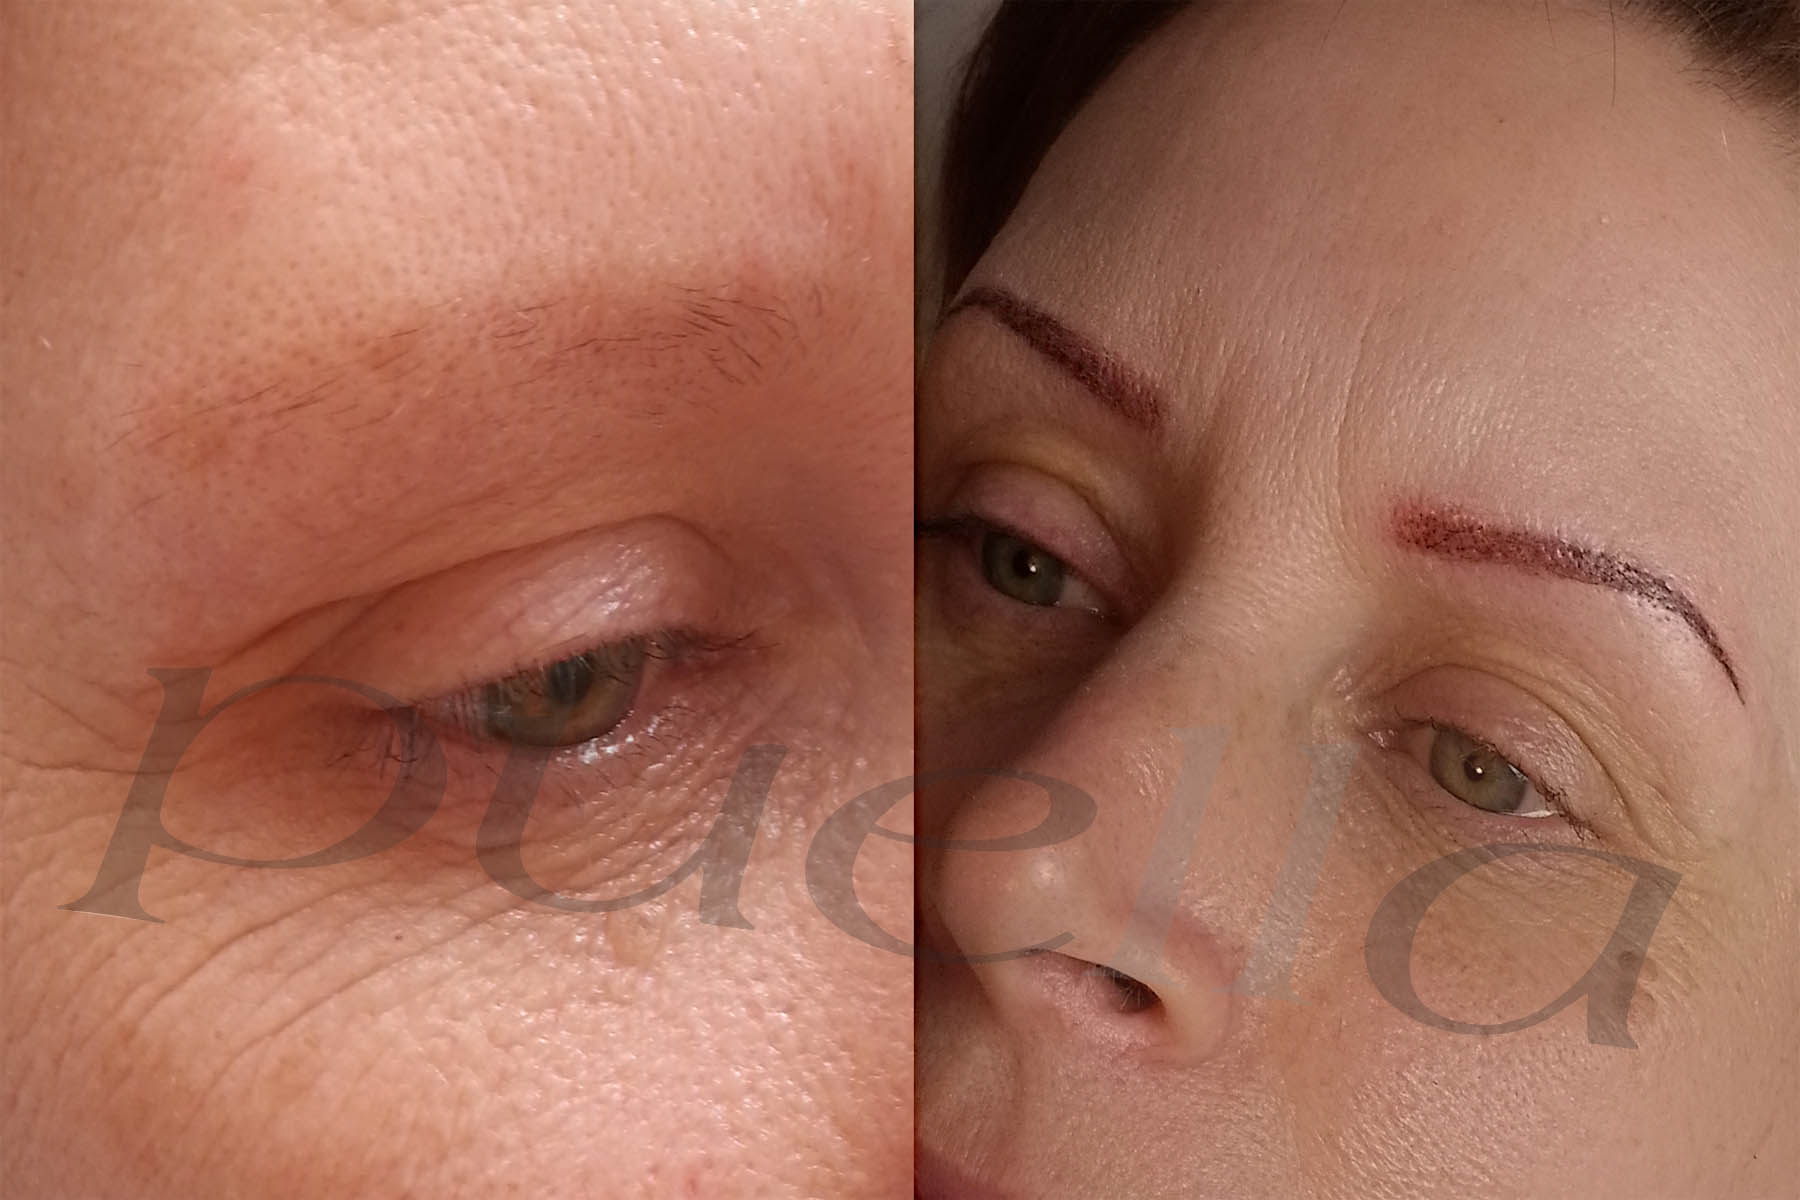 Permanent makeup by Puella Beauty - eyebrows before and after image